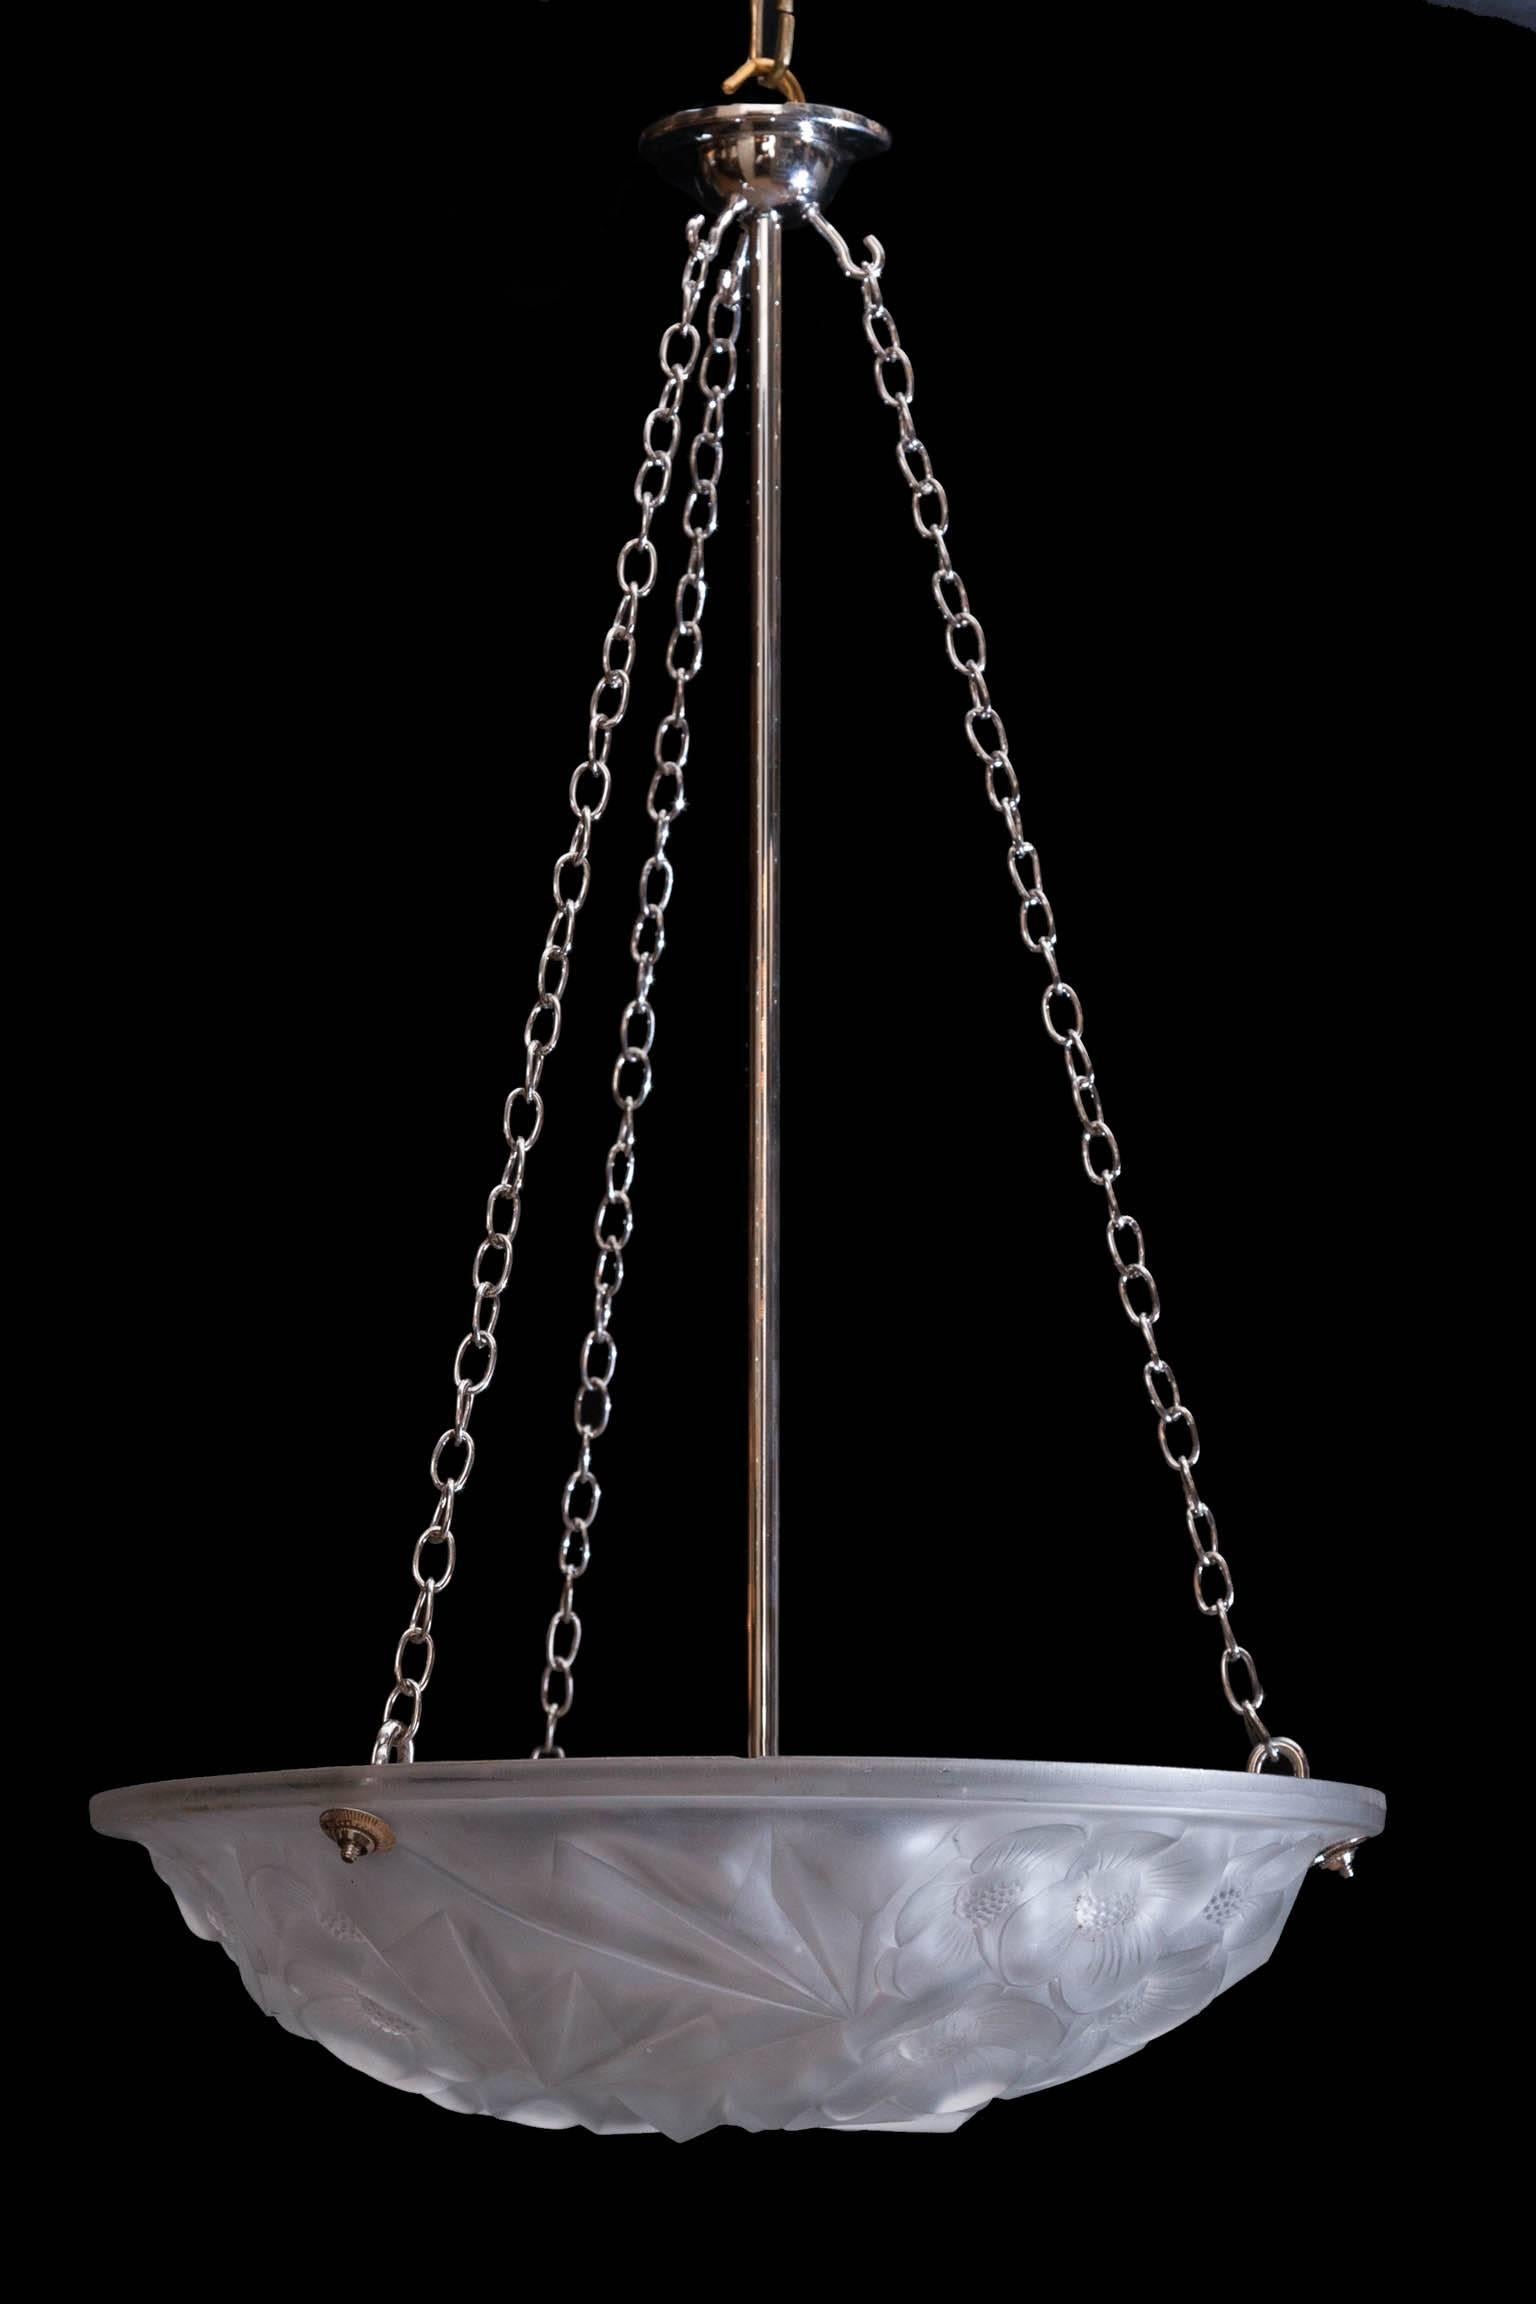 Moulded glass dish light hanging on three nickel chains from a ceiling hook, Decorated with  flowers and electrified for the UK with a central nickel rod and chain. France circa 1930

We are members of LAPADA and CINOA.

Re-electrification for non